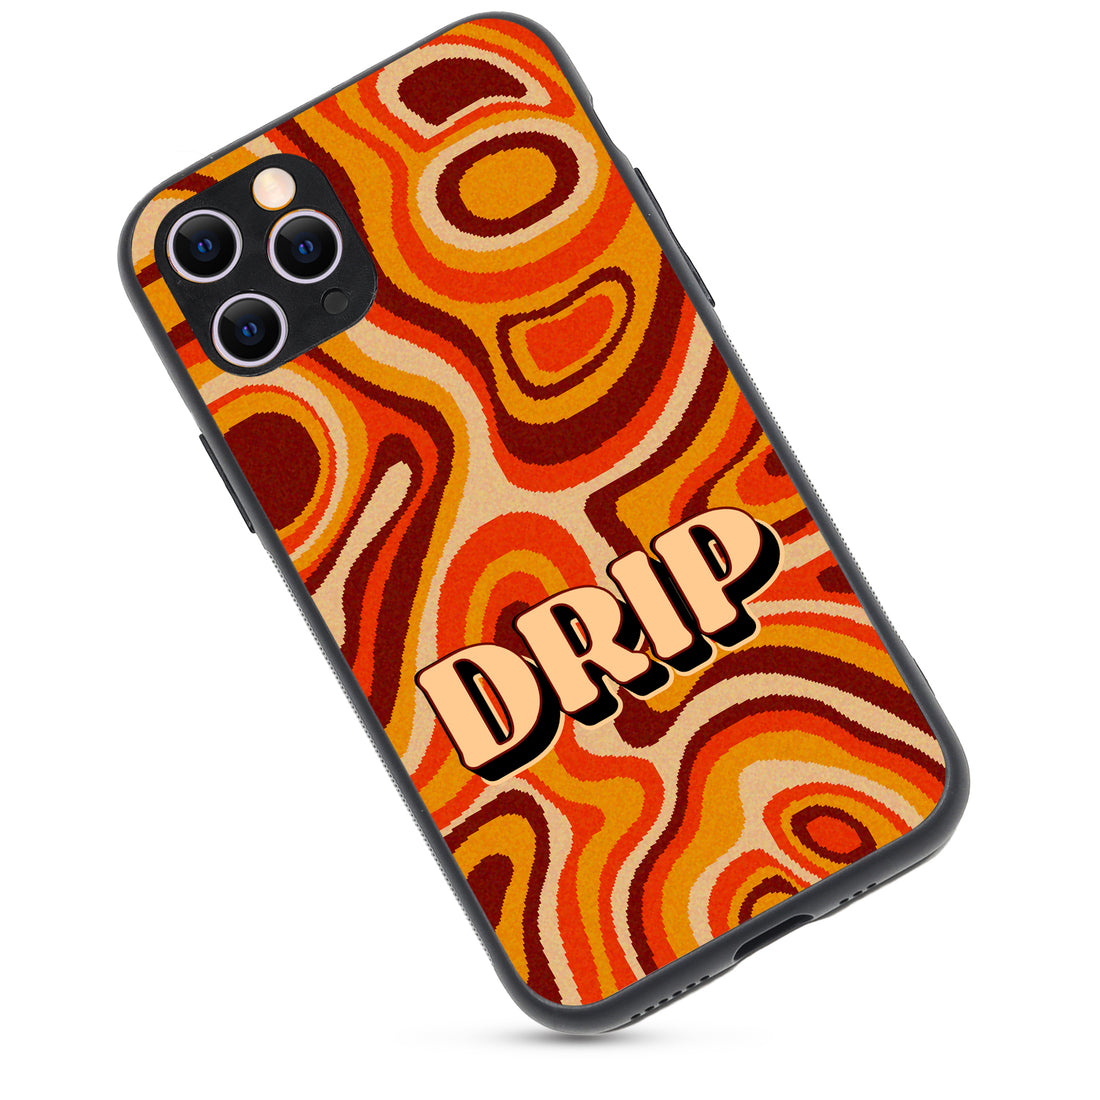 Drip Marble iPhone 11 Pro Case